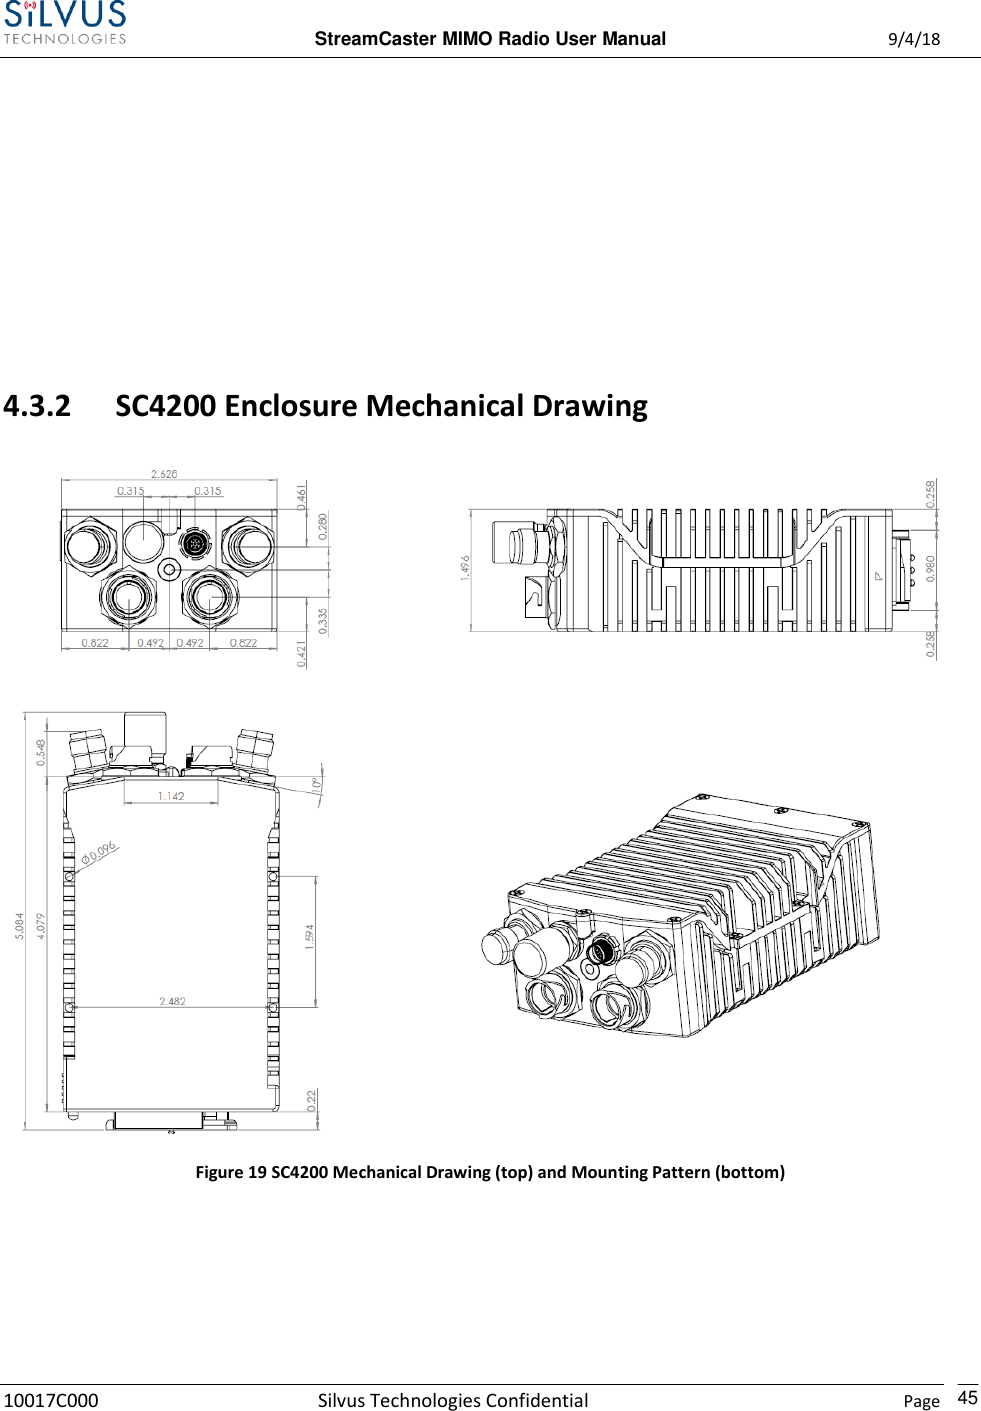  StreamCaster MIMO Radio User Manual  9/4/18 10017C000 Silvus Technologies Confidential    Page    45       4.3.2 SC4200 Enclosure Mechanical Drawing   Figure 19 SC4200 Mechanical Drawing (top) and Mounting Pattern (bottom)  